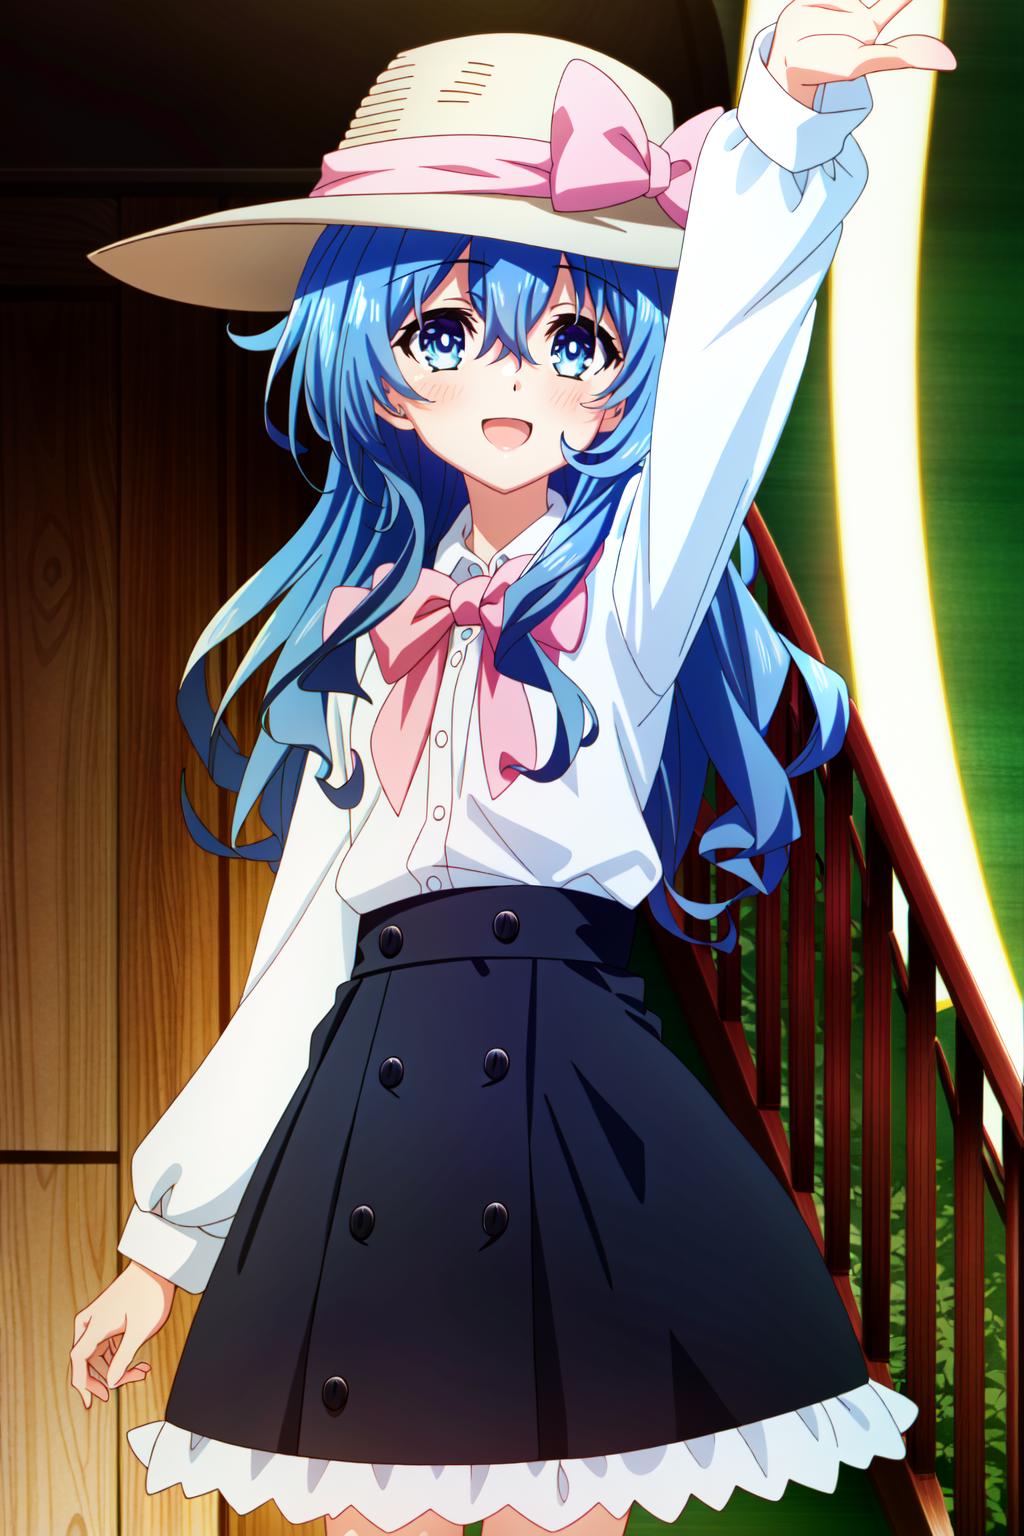 Buy Good Smile Date A Live: Yoshino PVC Figure Online at Low Prices in  India - Amazon.in